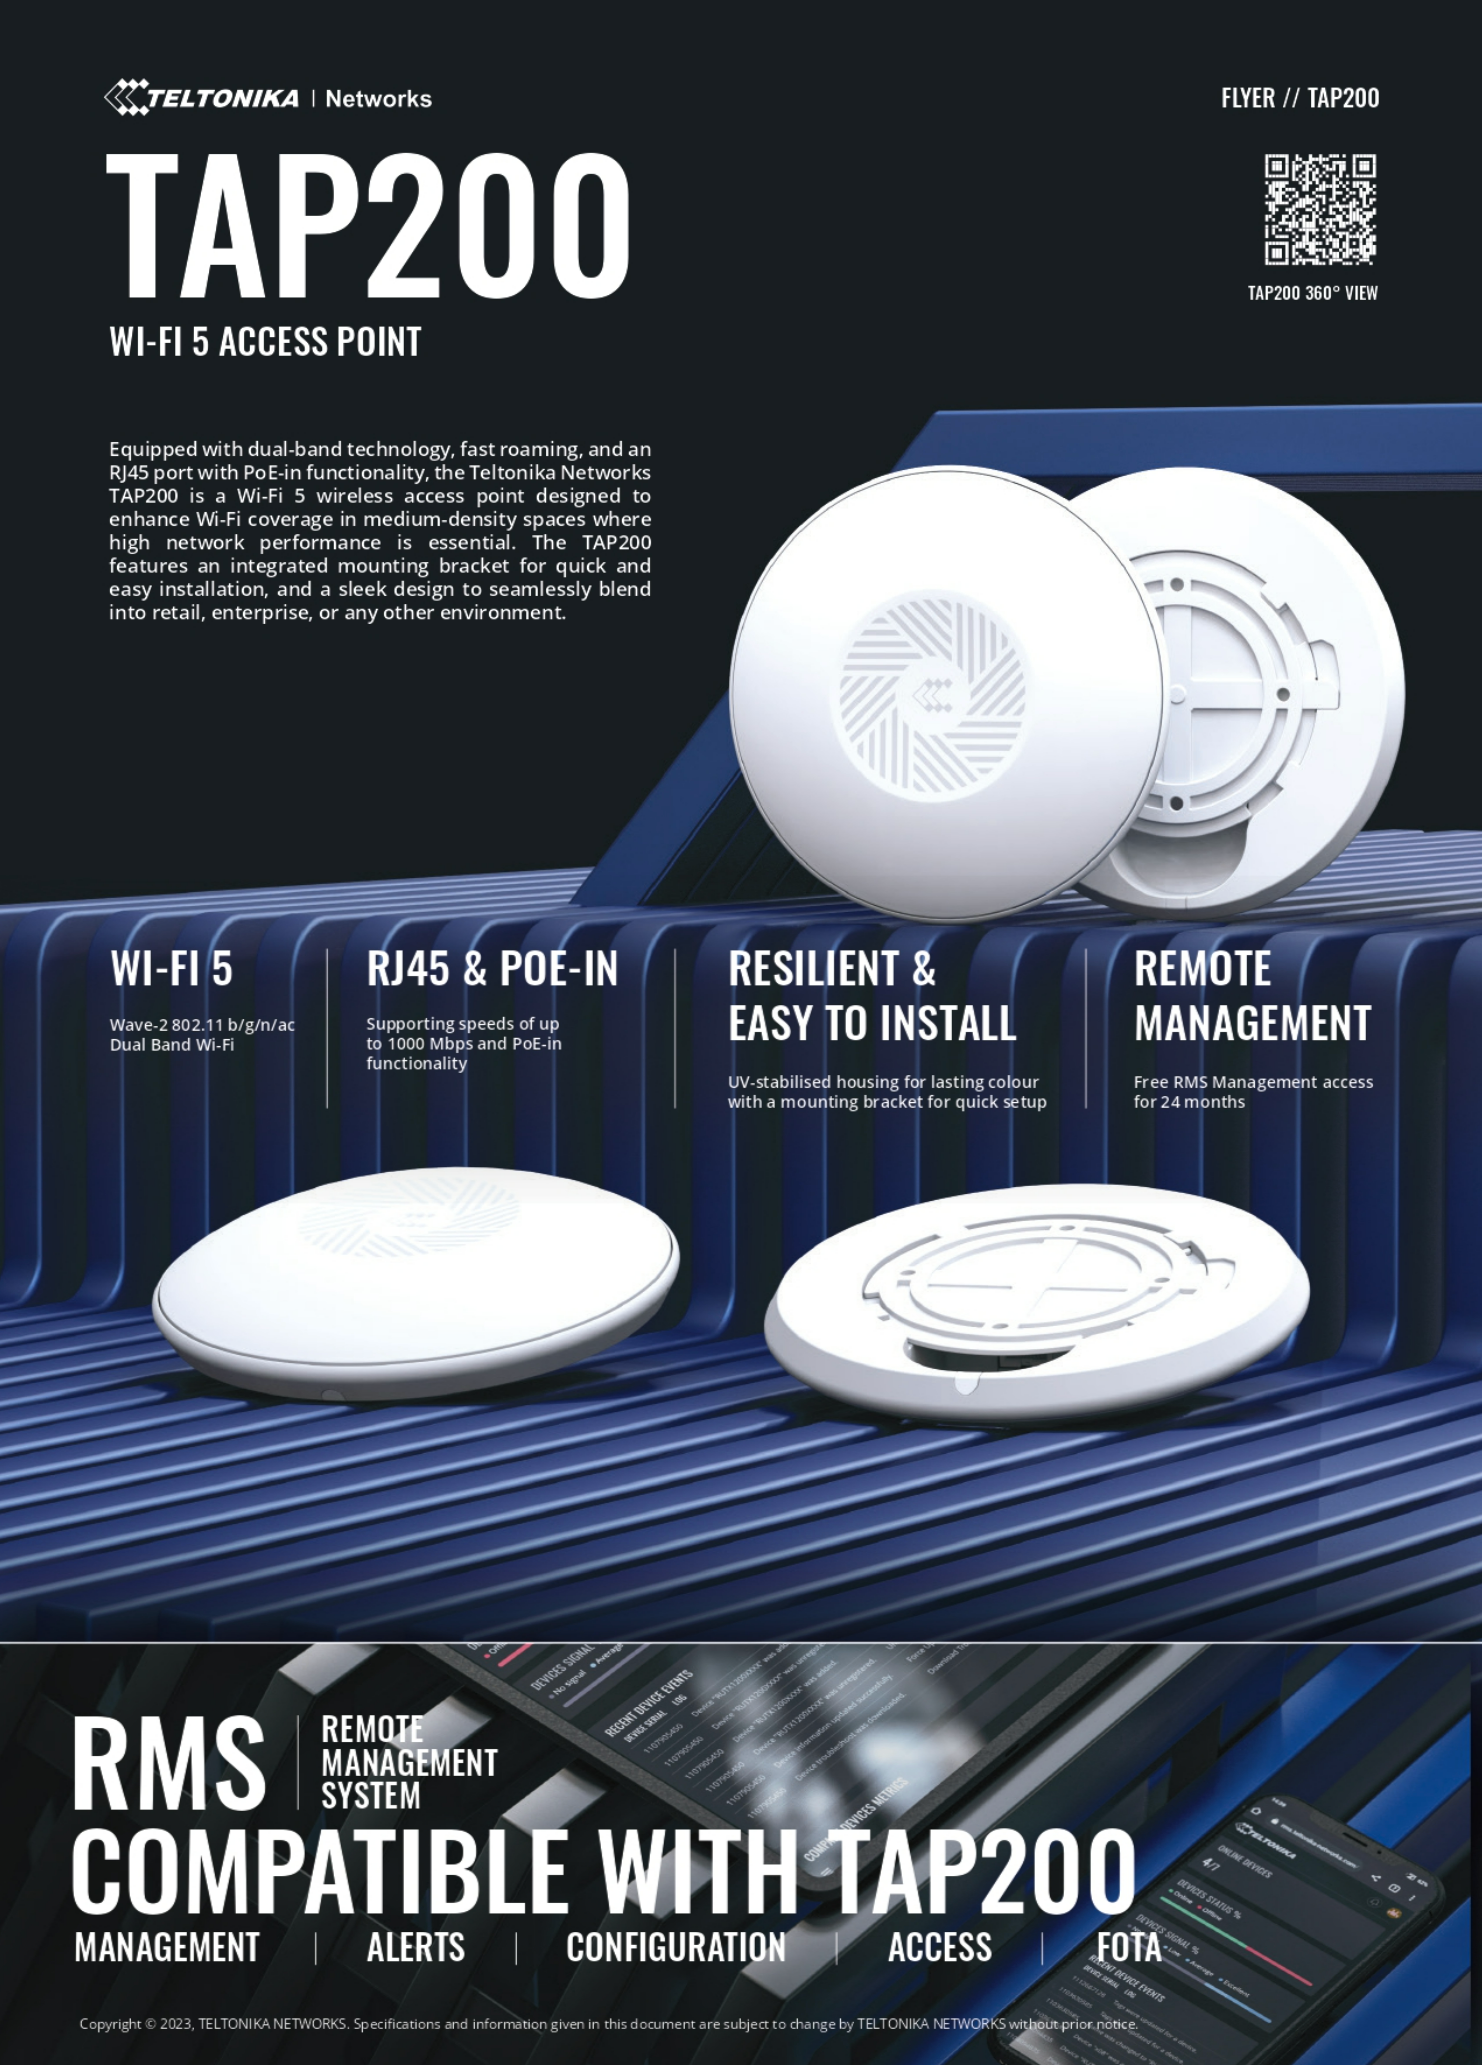 A large marketing image providing additional information about the product Teltonika TAP200 – Wi-Fi 5 Access Point - Additional alt info not provided